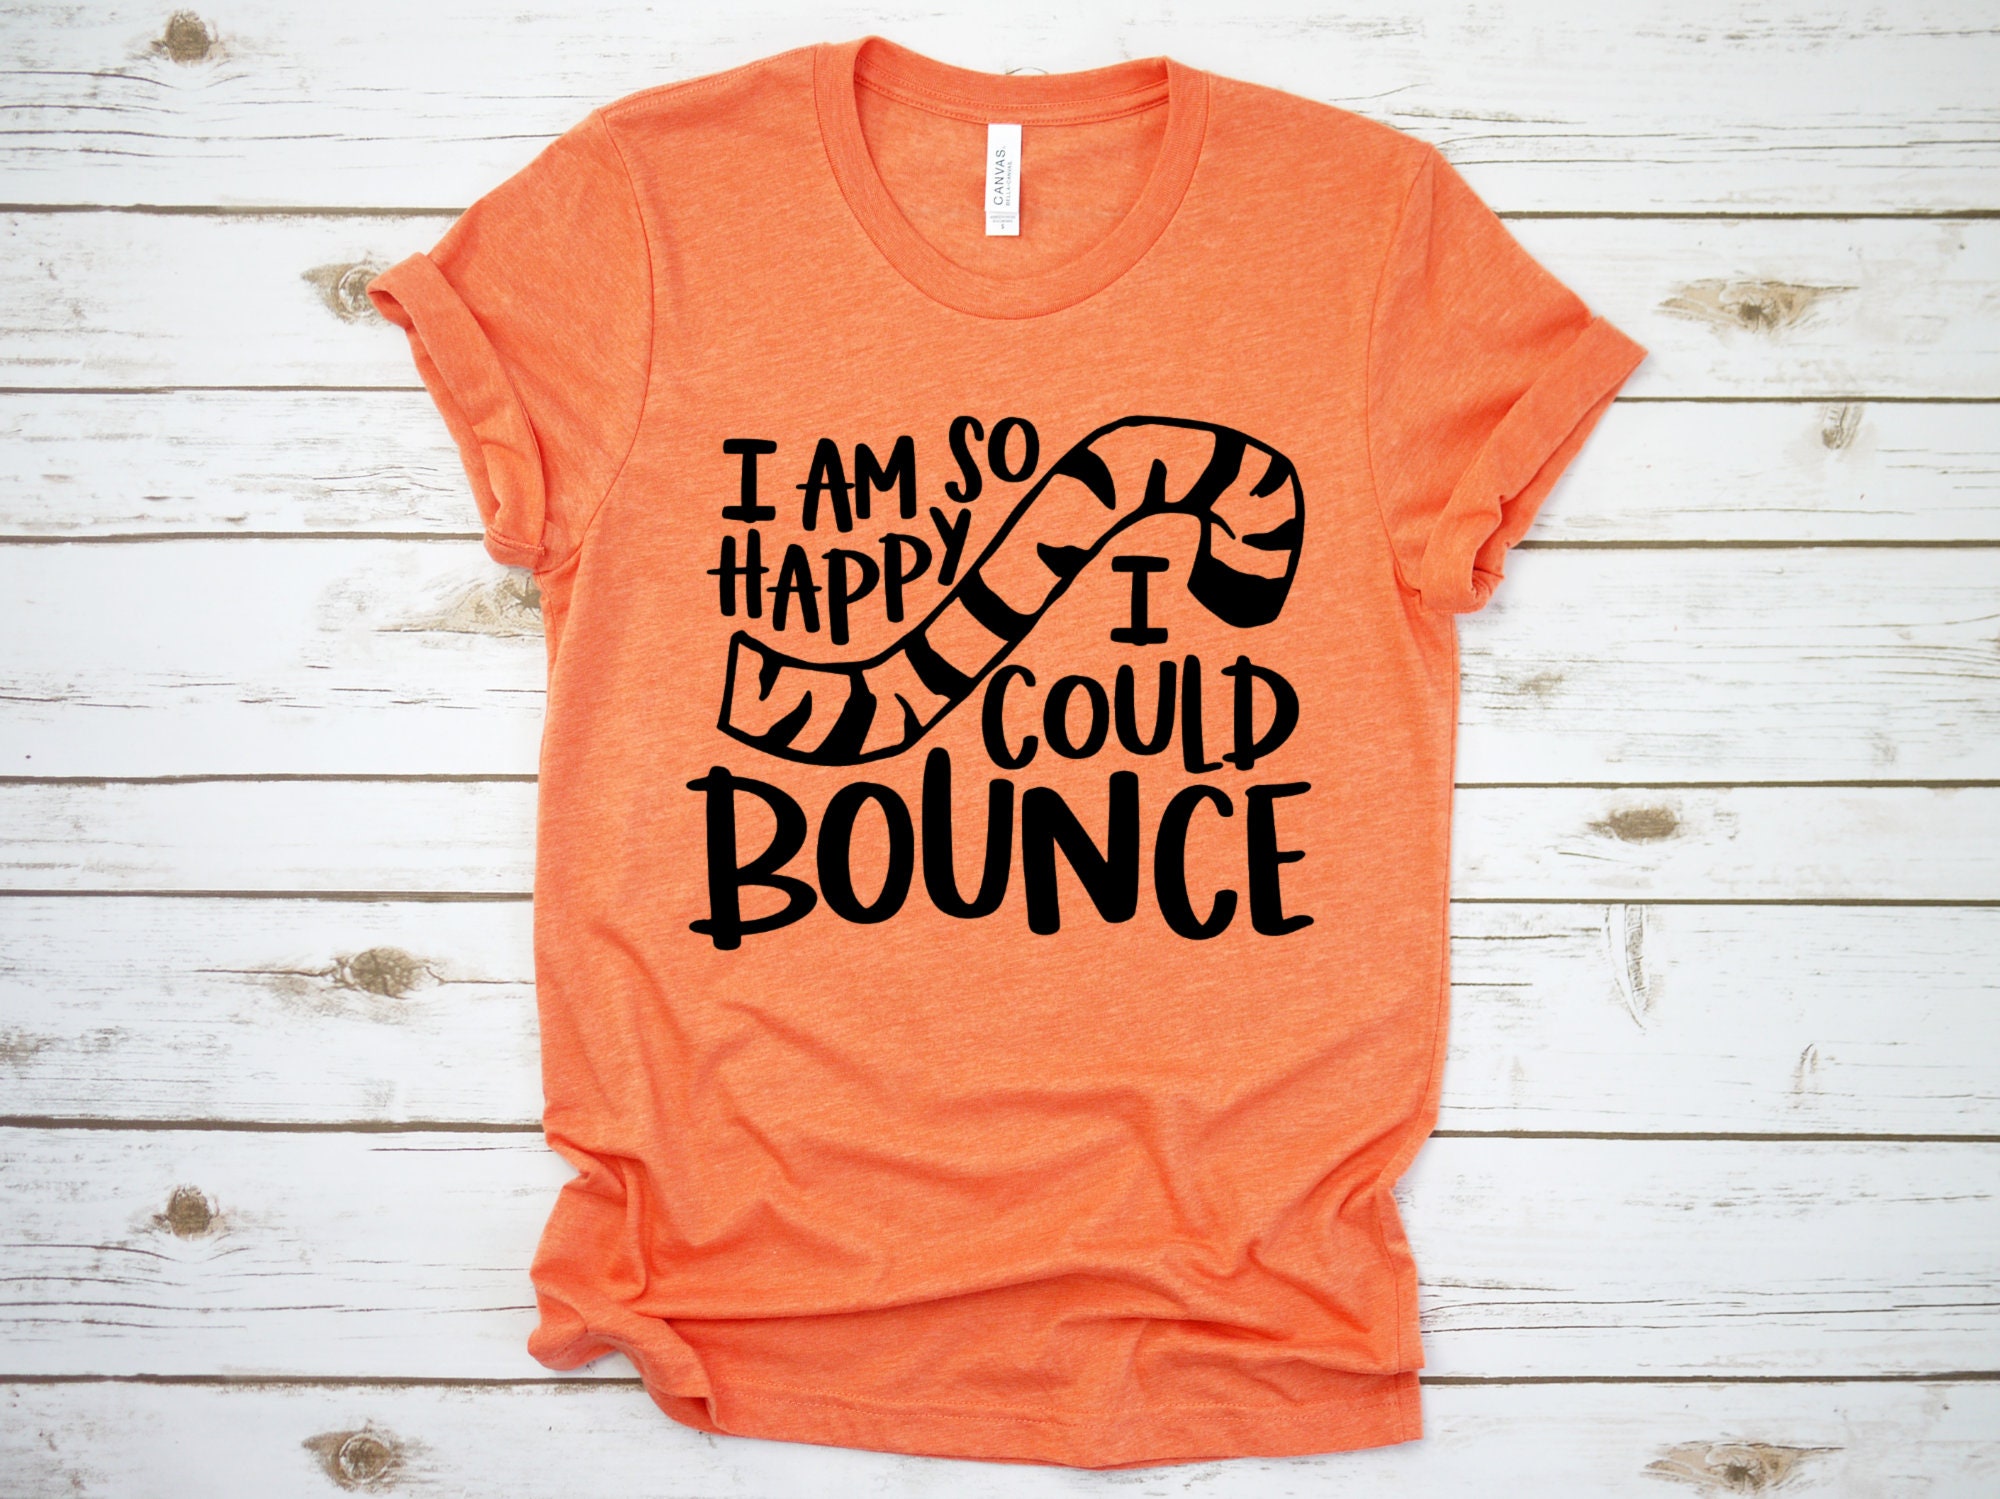 Discover I am so happy I could bounce shirt